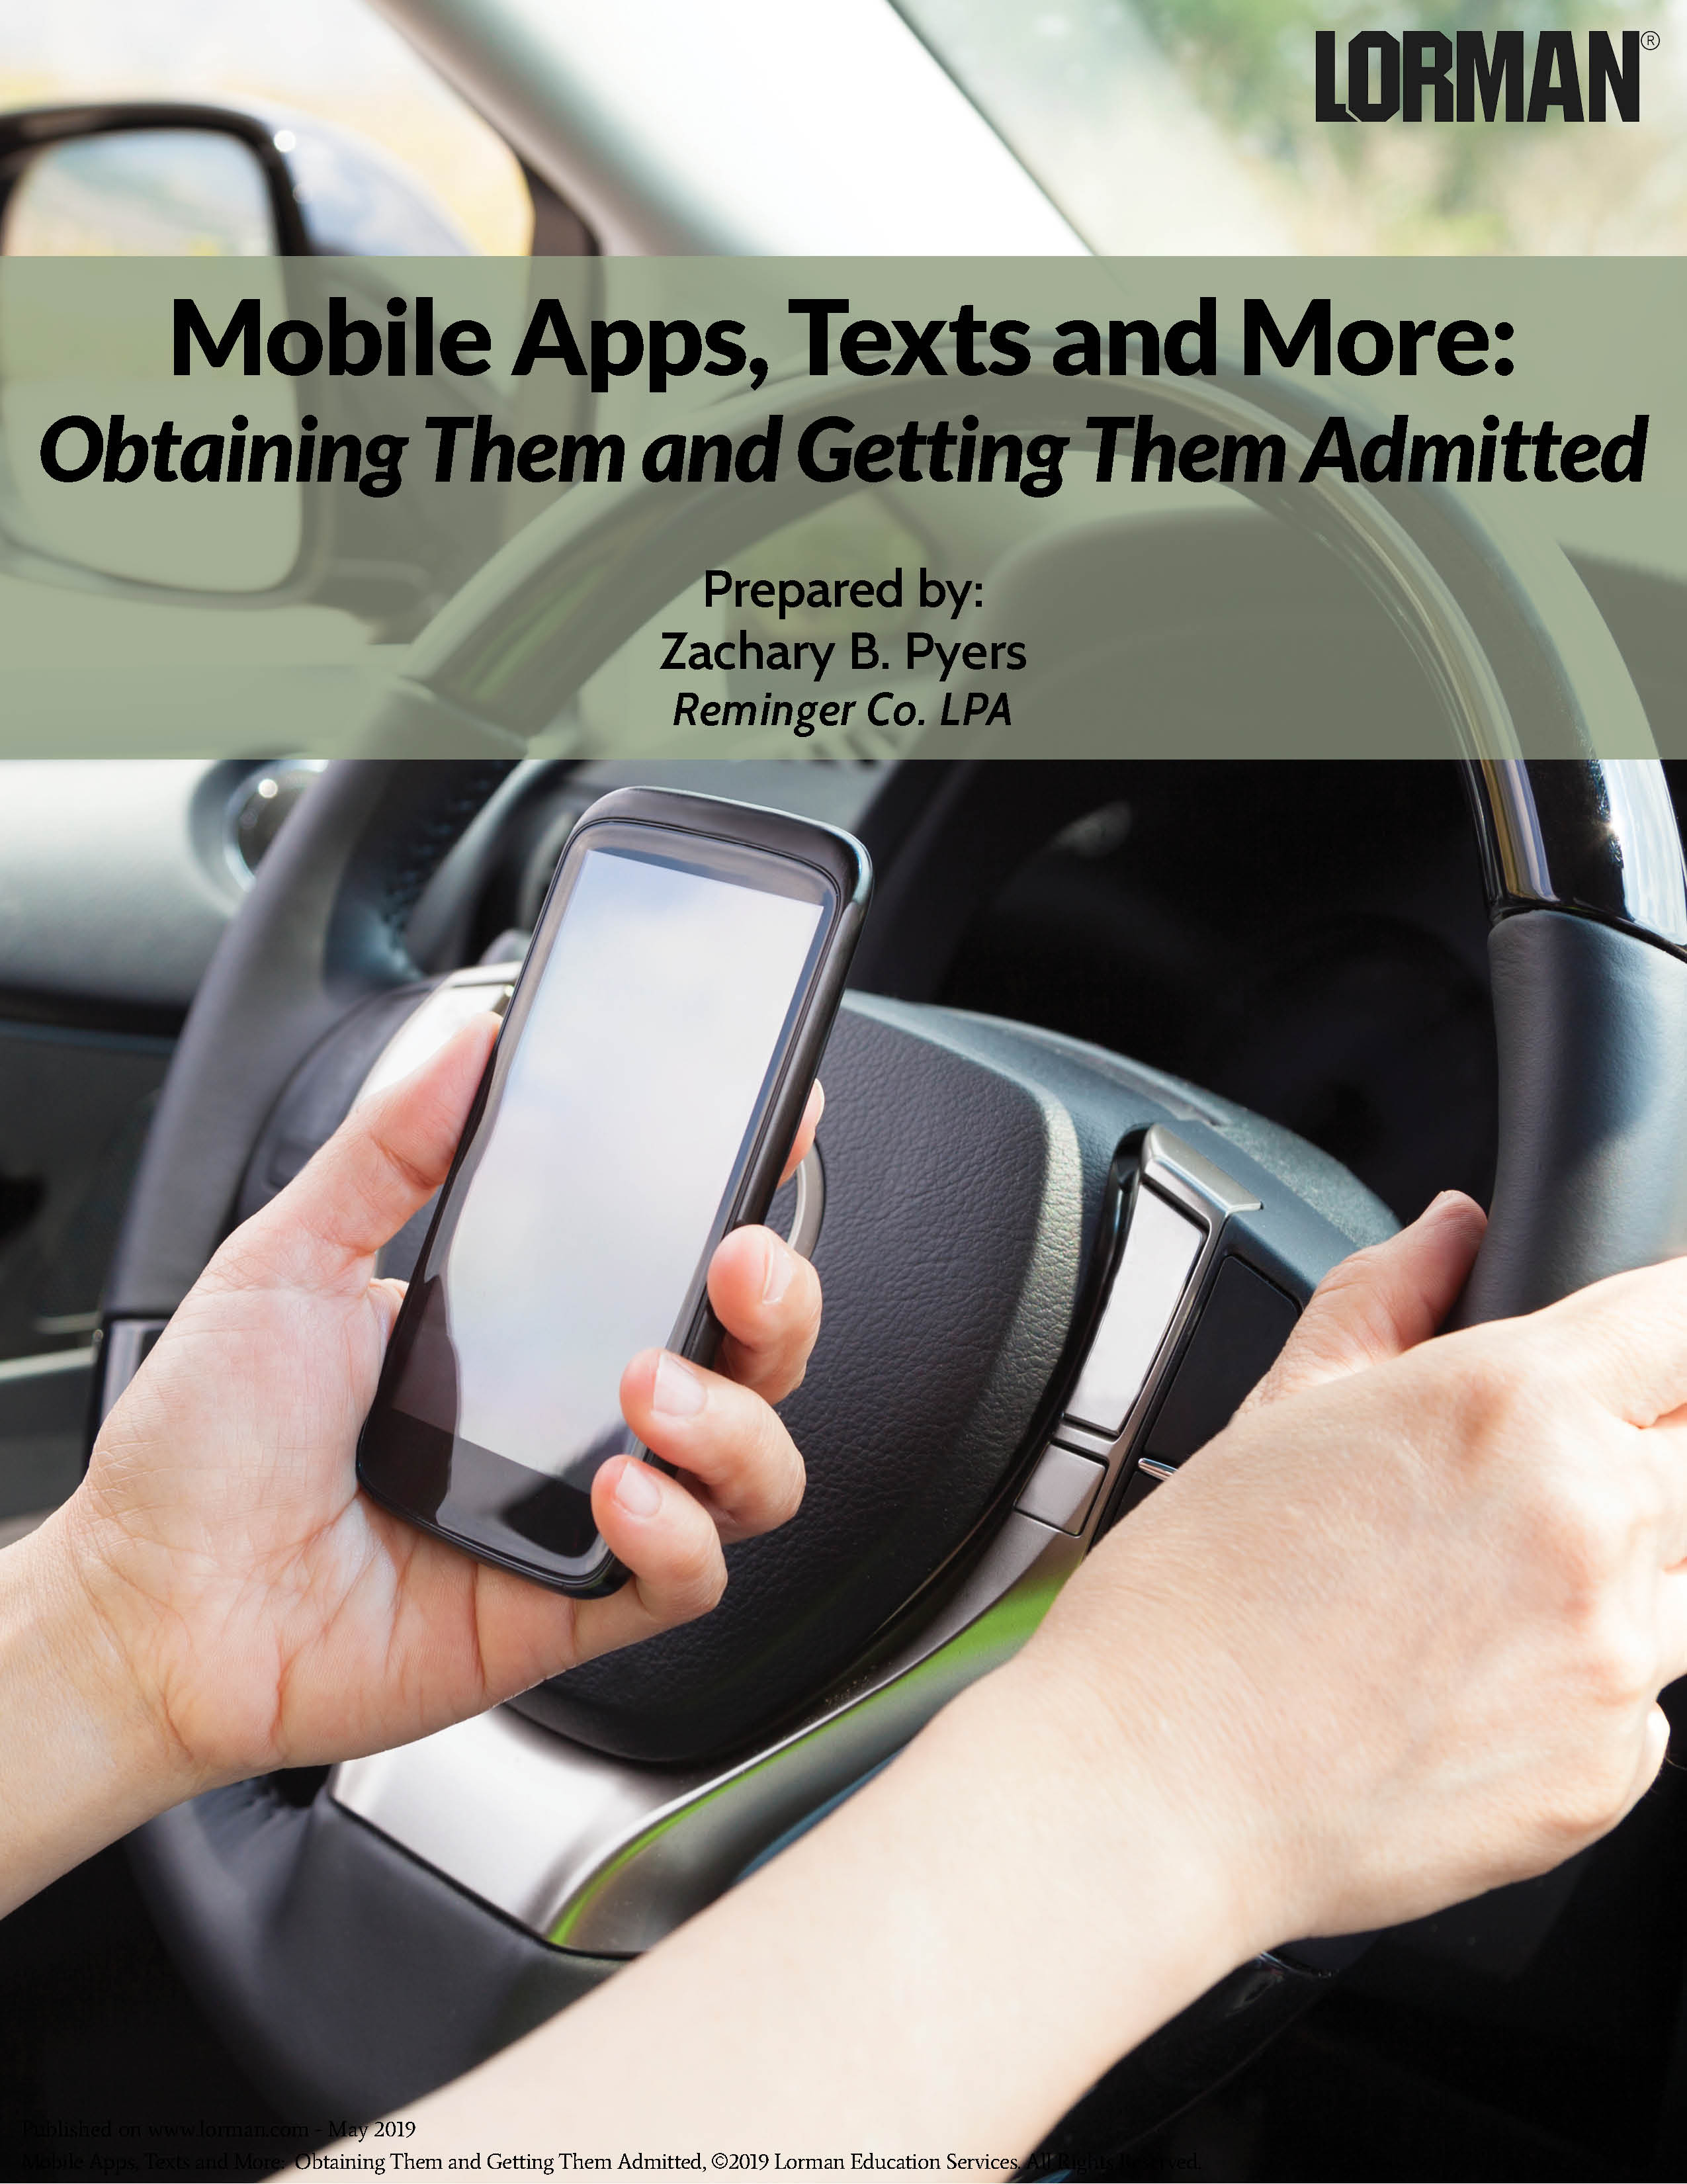 Mobile Apps, Texts and More: Obtaining Them and Getting Them Admitted